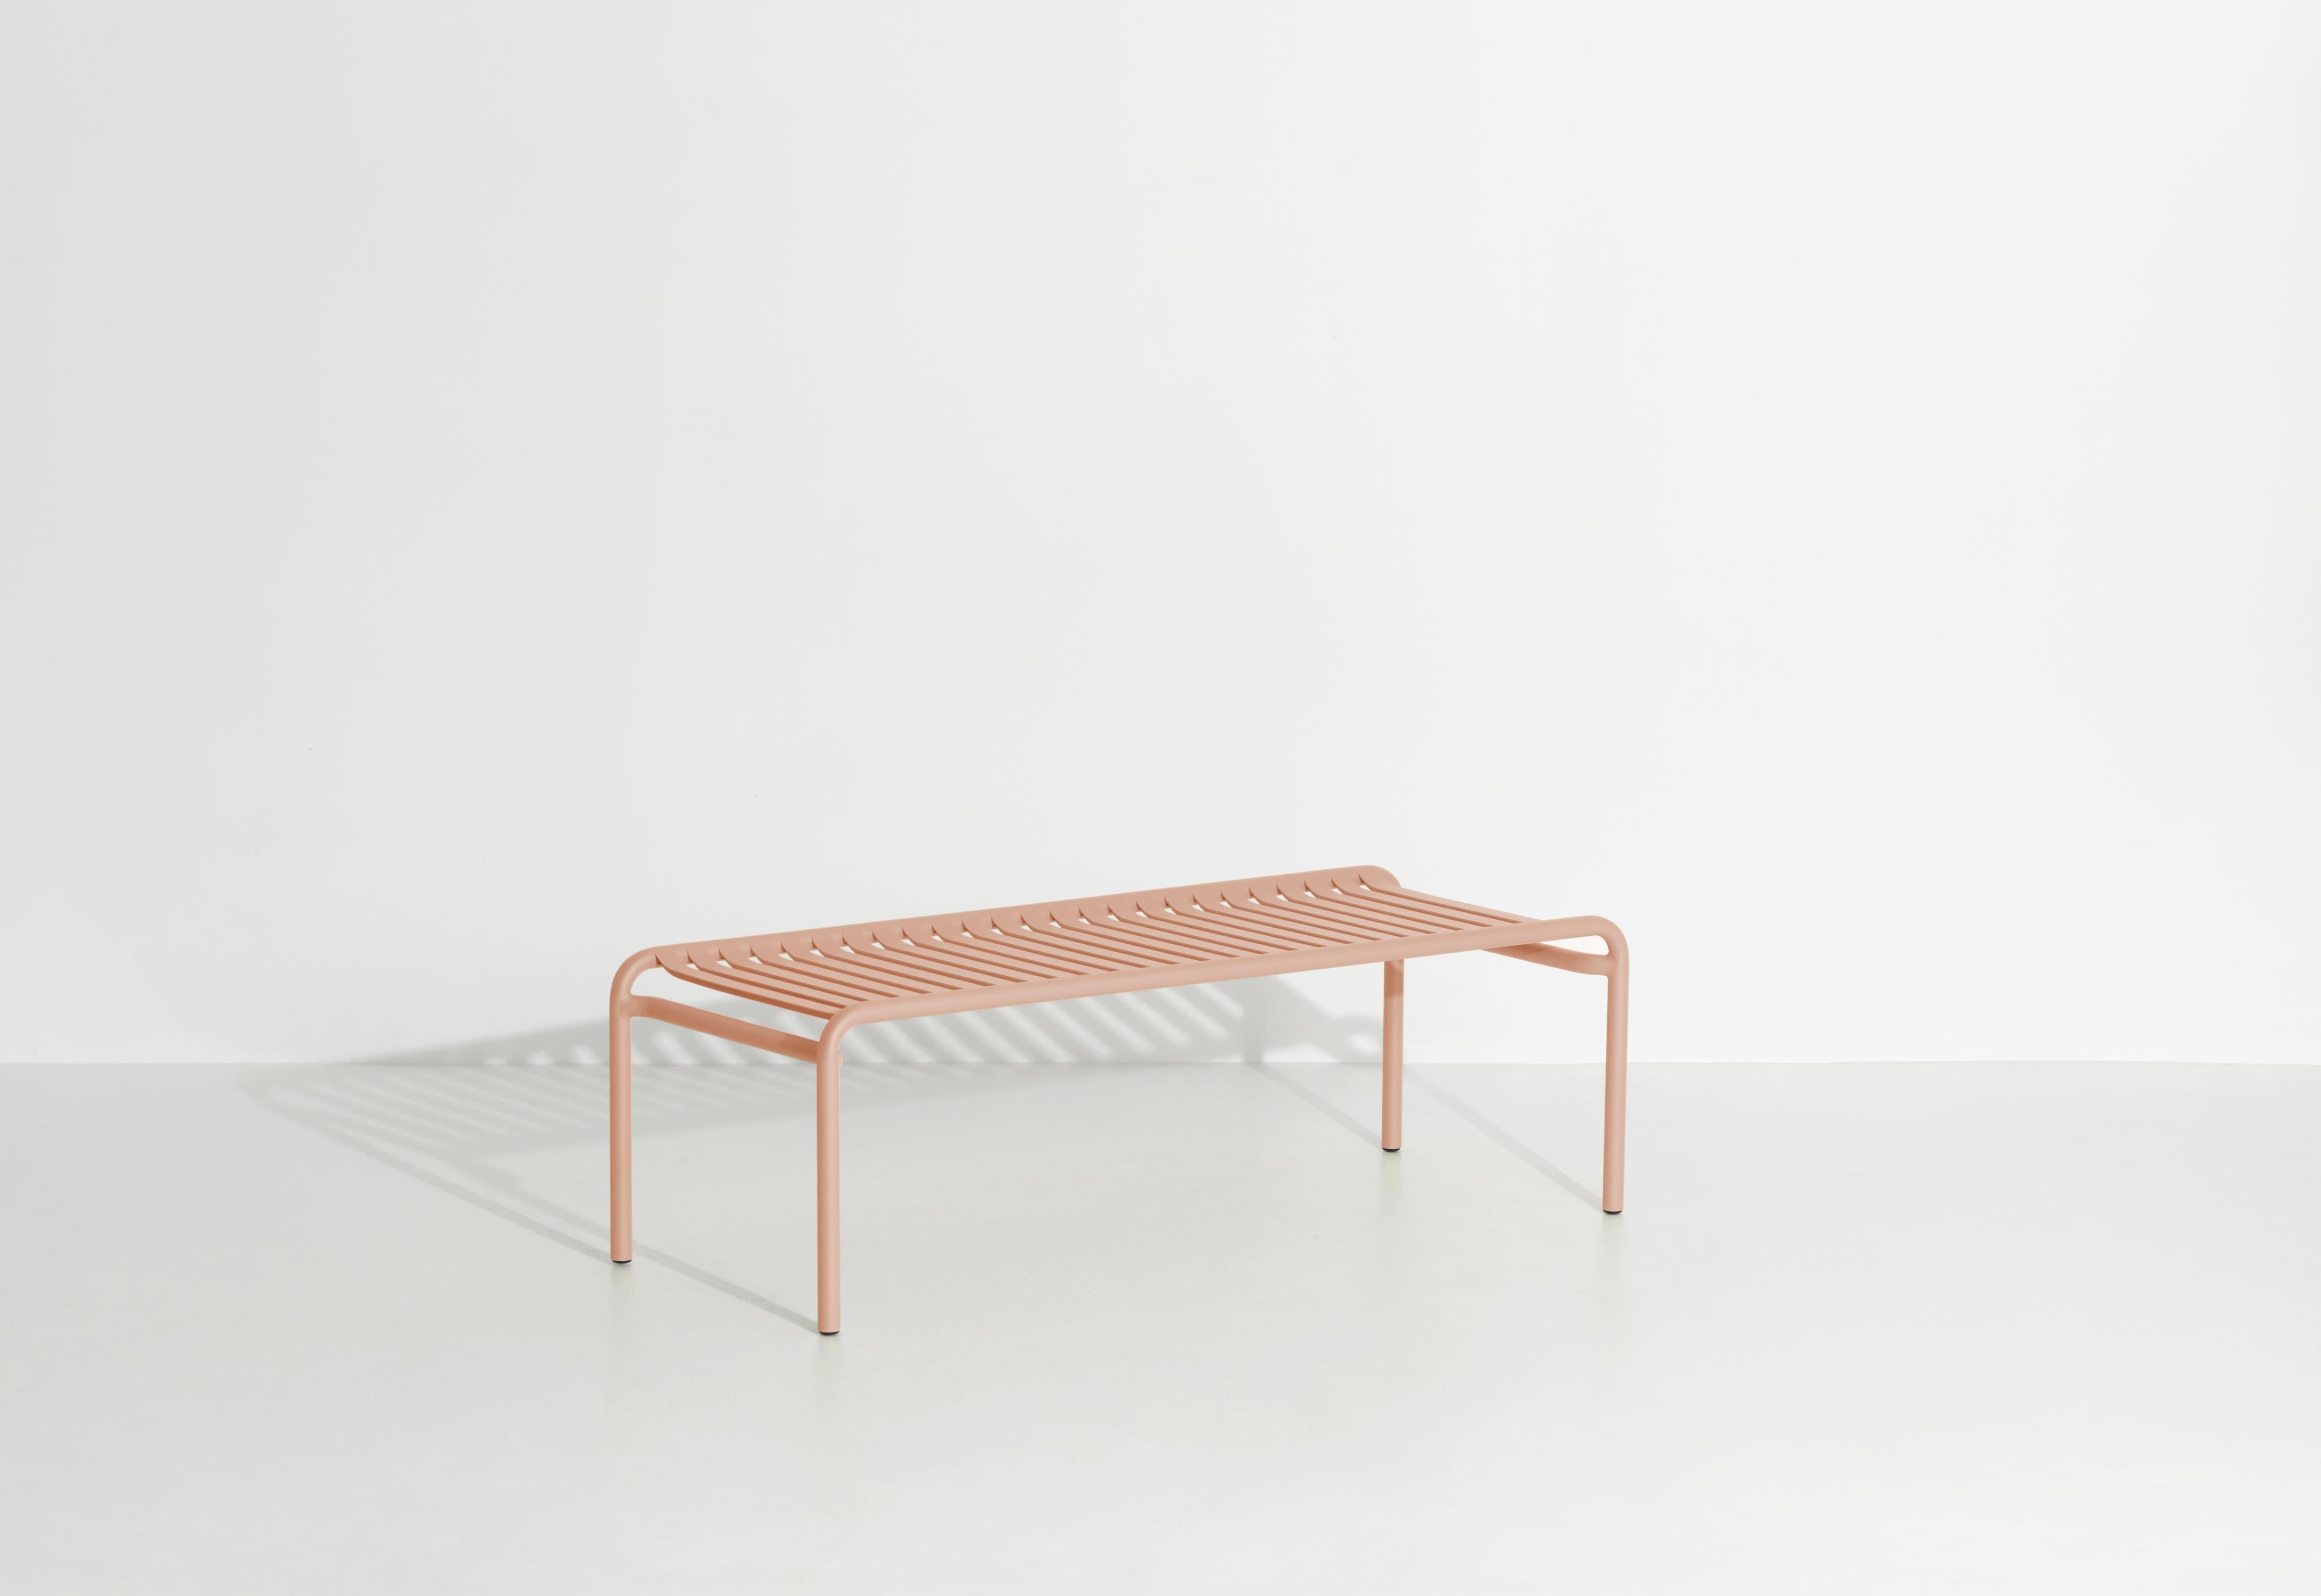 Chinese Petite Friture Week-End Long Coffee Table in Blush Aluminium, 2017 For Sale